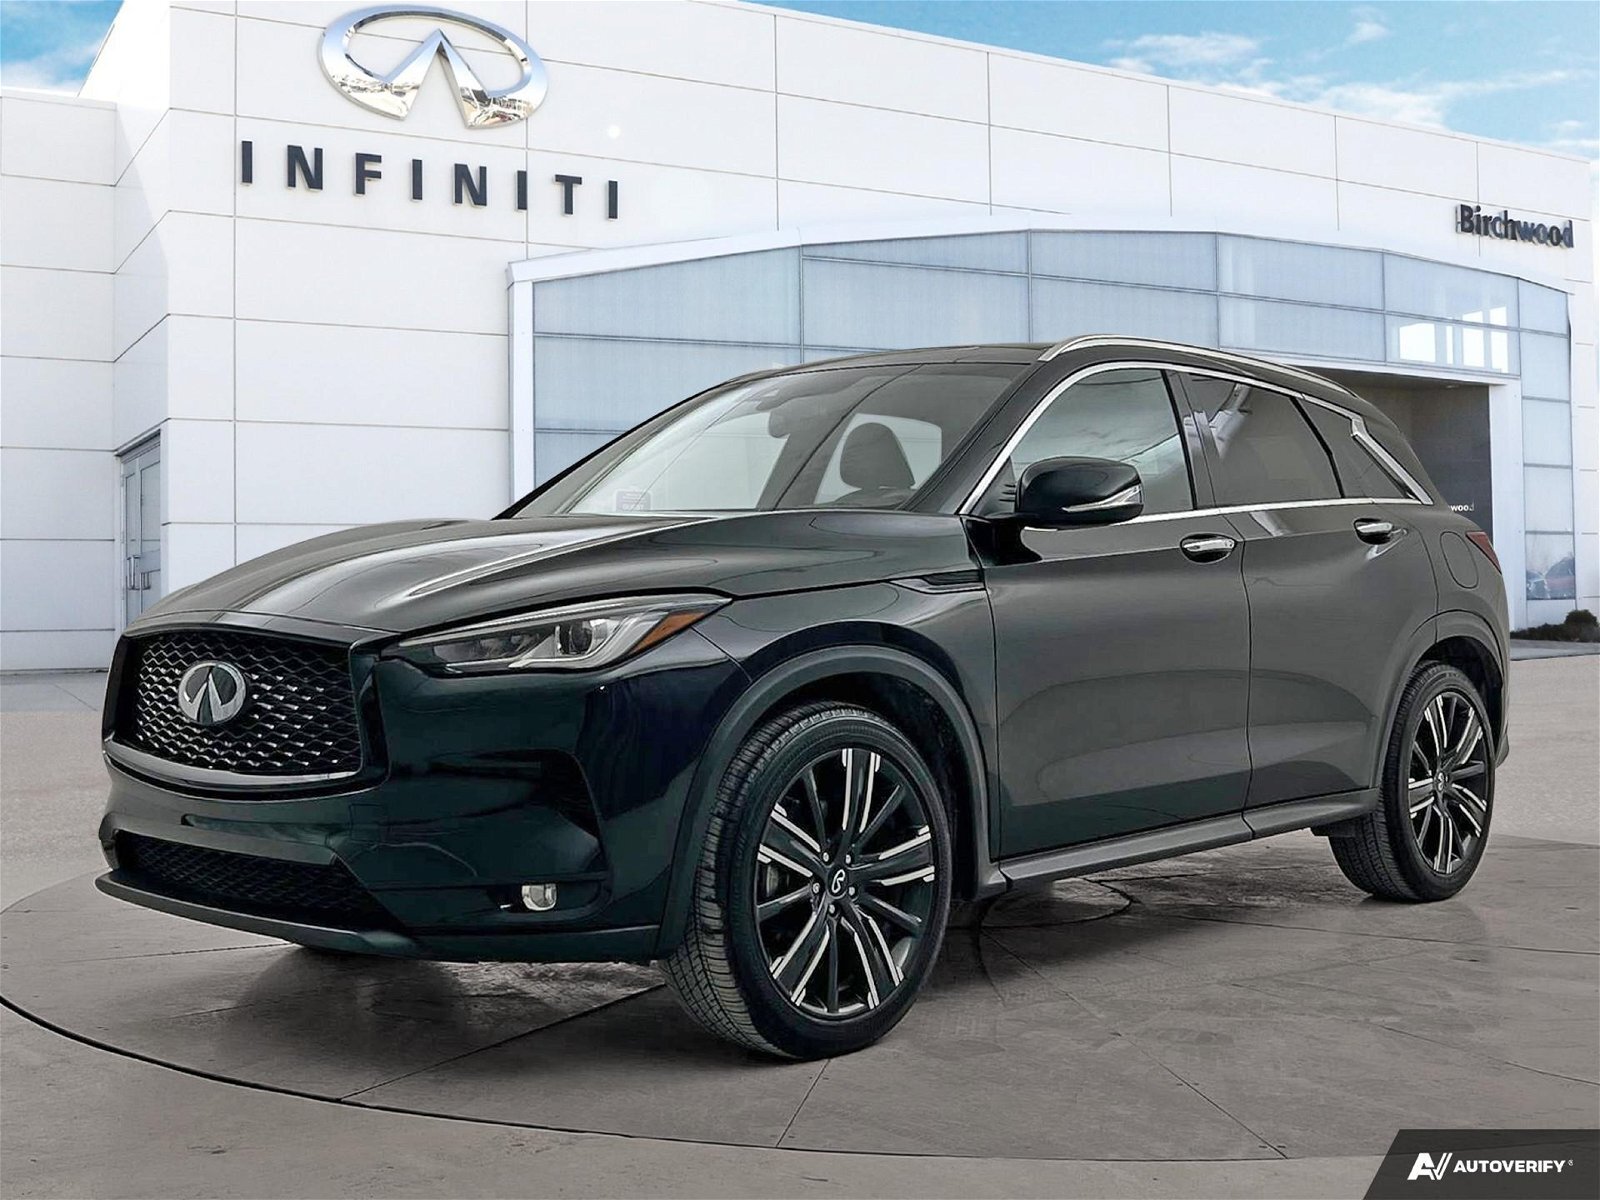 2022 Infiniti QX50 LUXE I-LINE Accident Free | 1 Owner Lease Return |